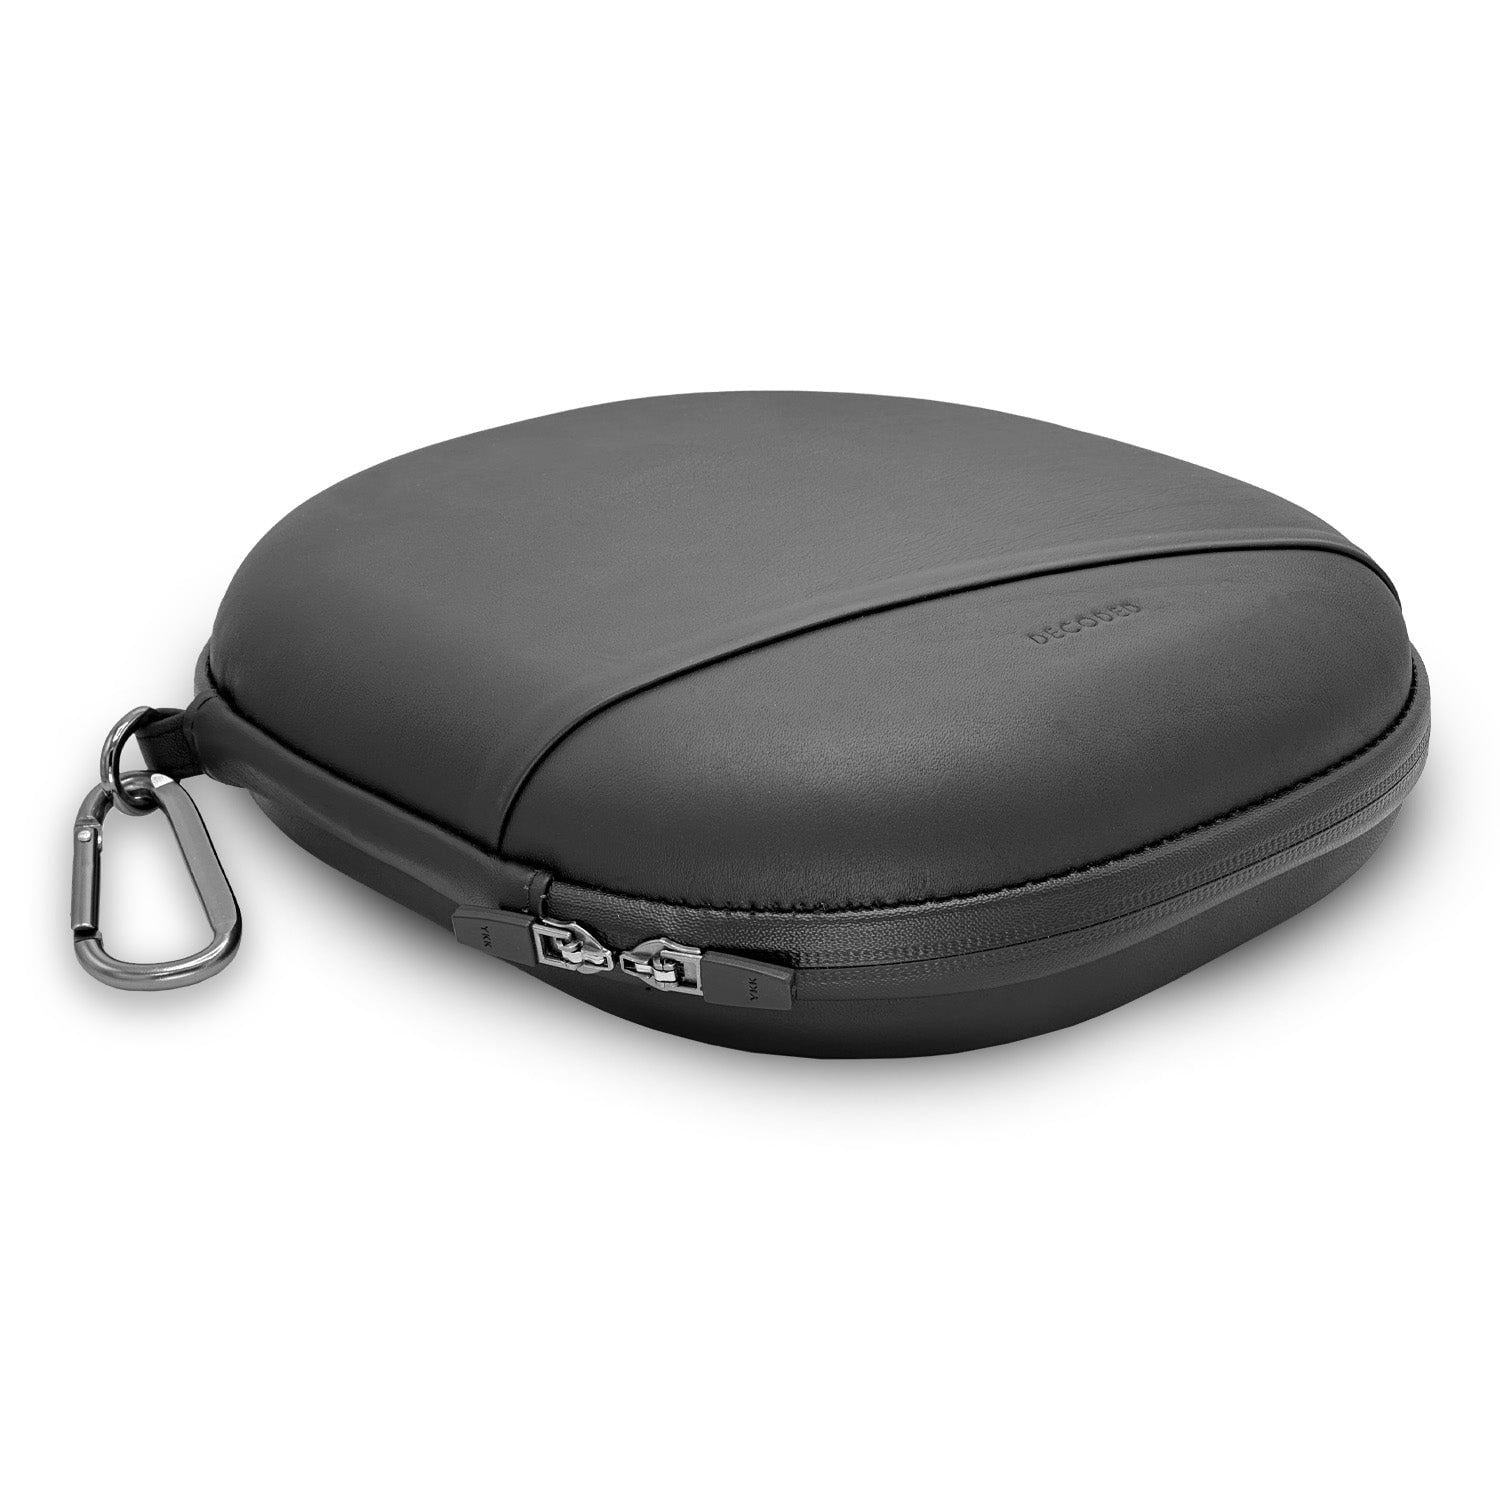 Leather AirPods Max Travel Case | Black